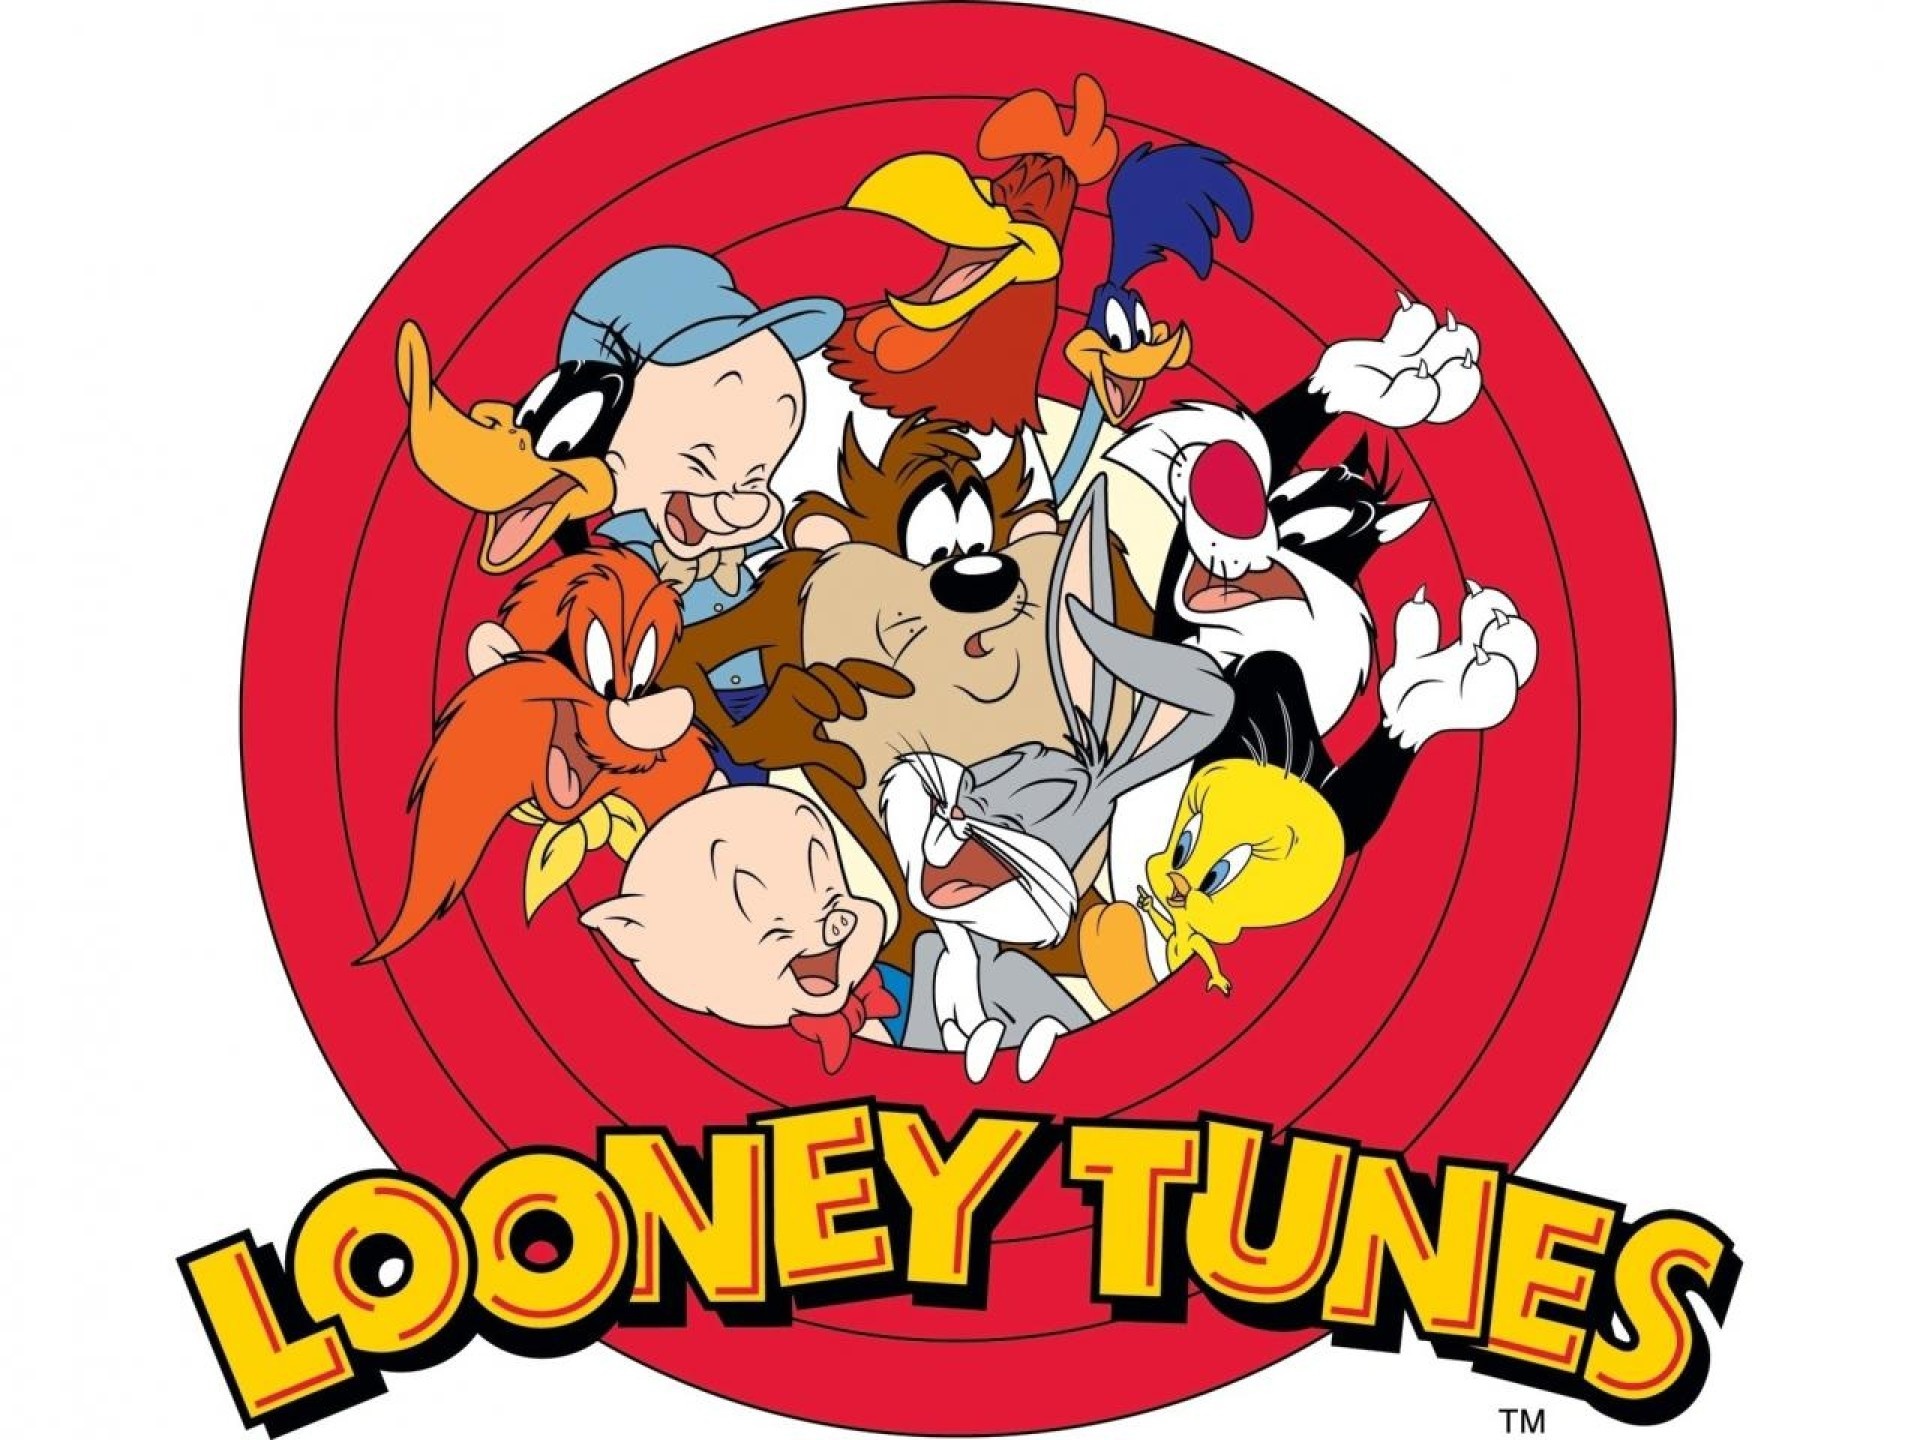 Looney Tunes, Cartoon characters, Colorful wallpapers, Animated series, 1920x1440 HD Desktop